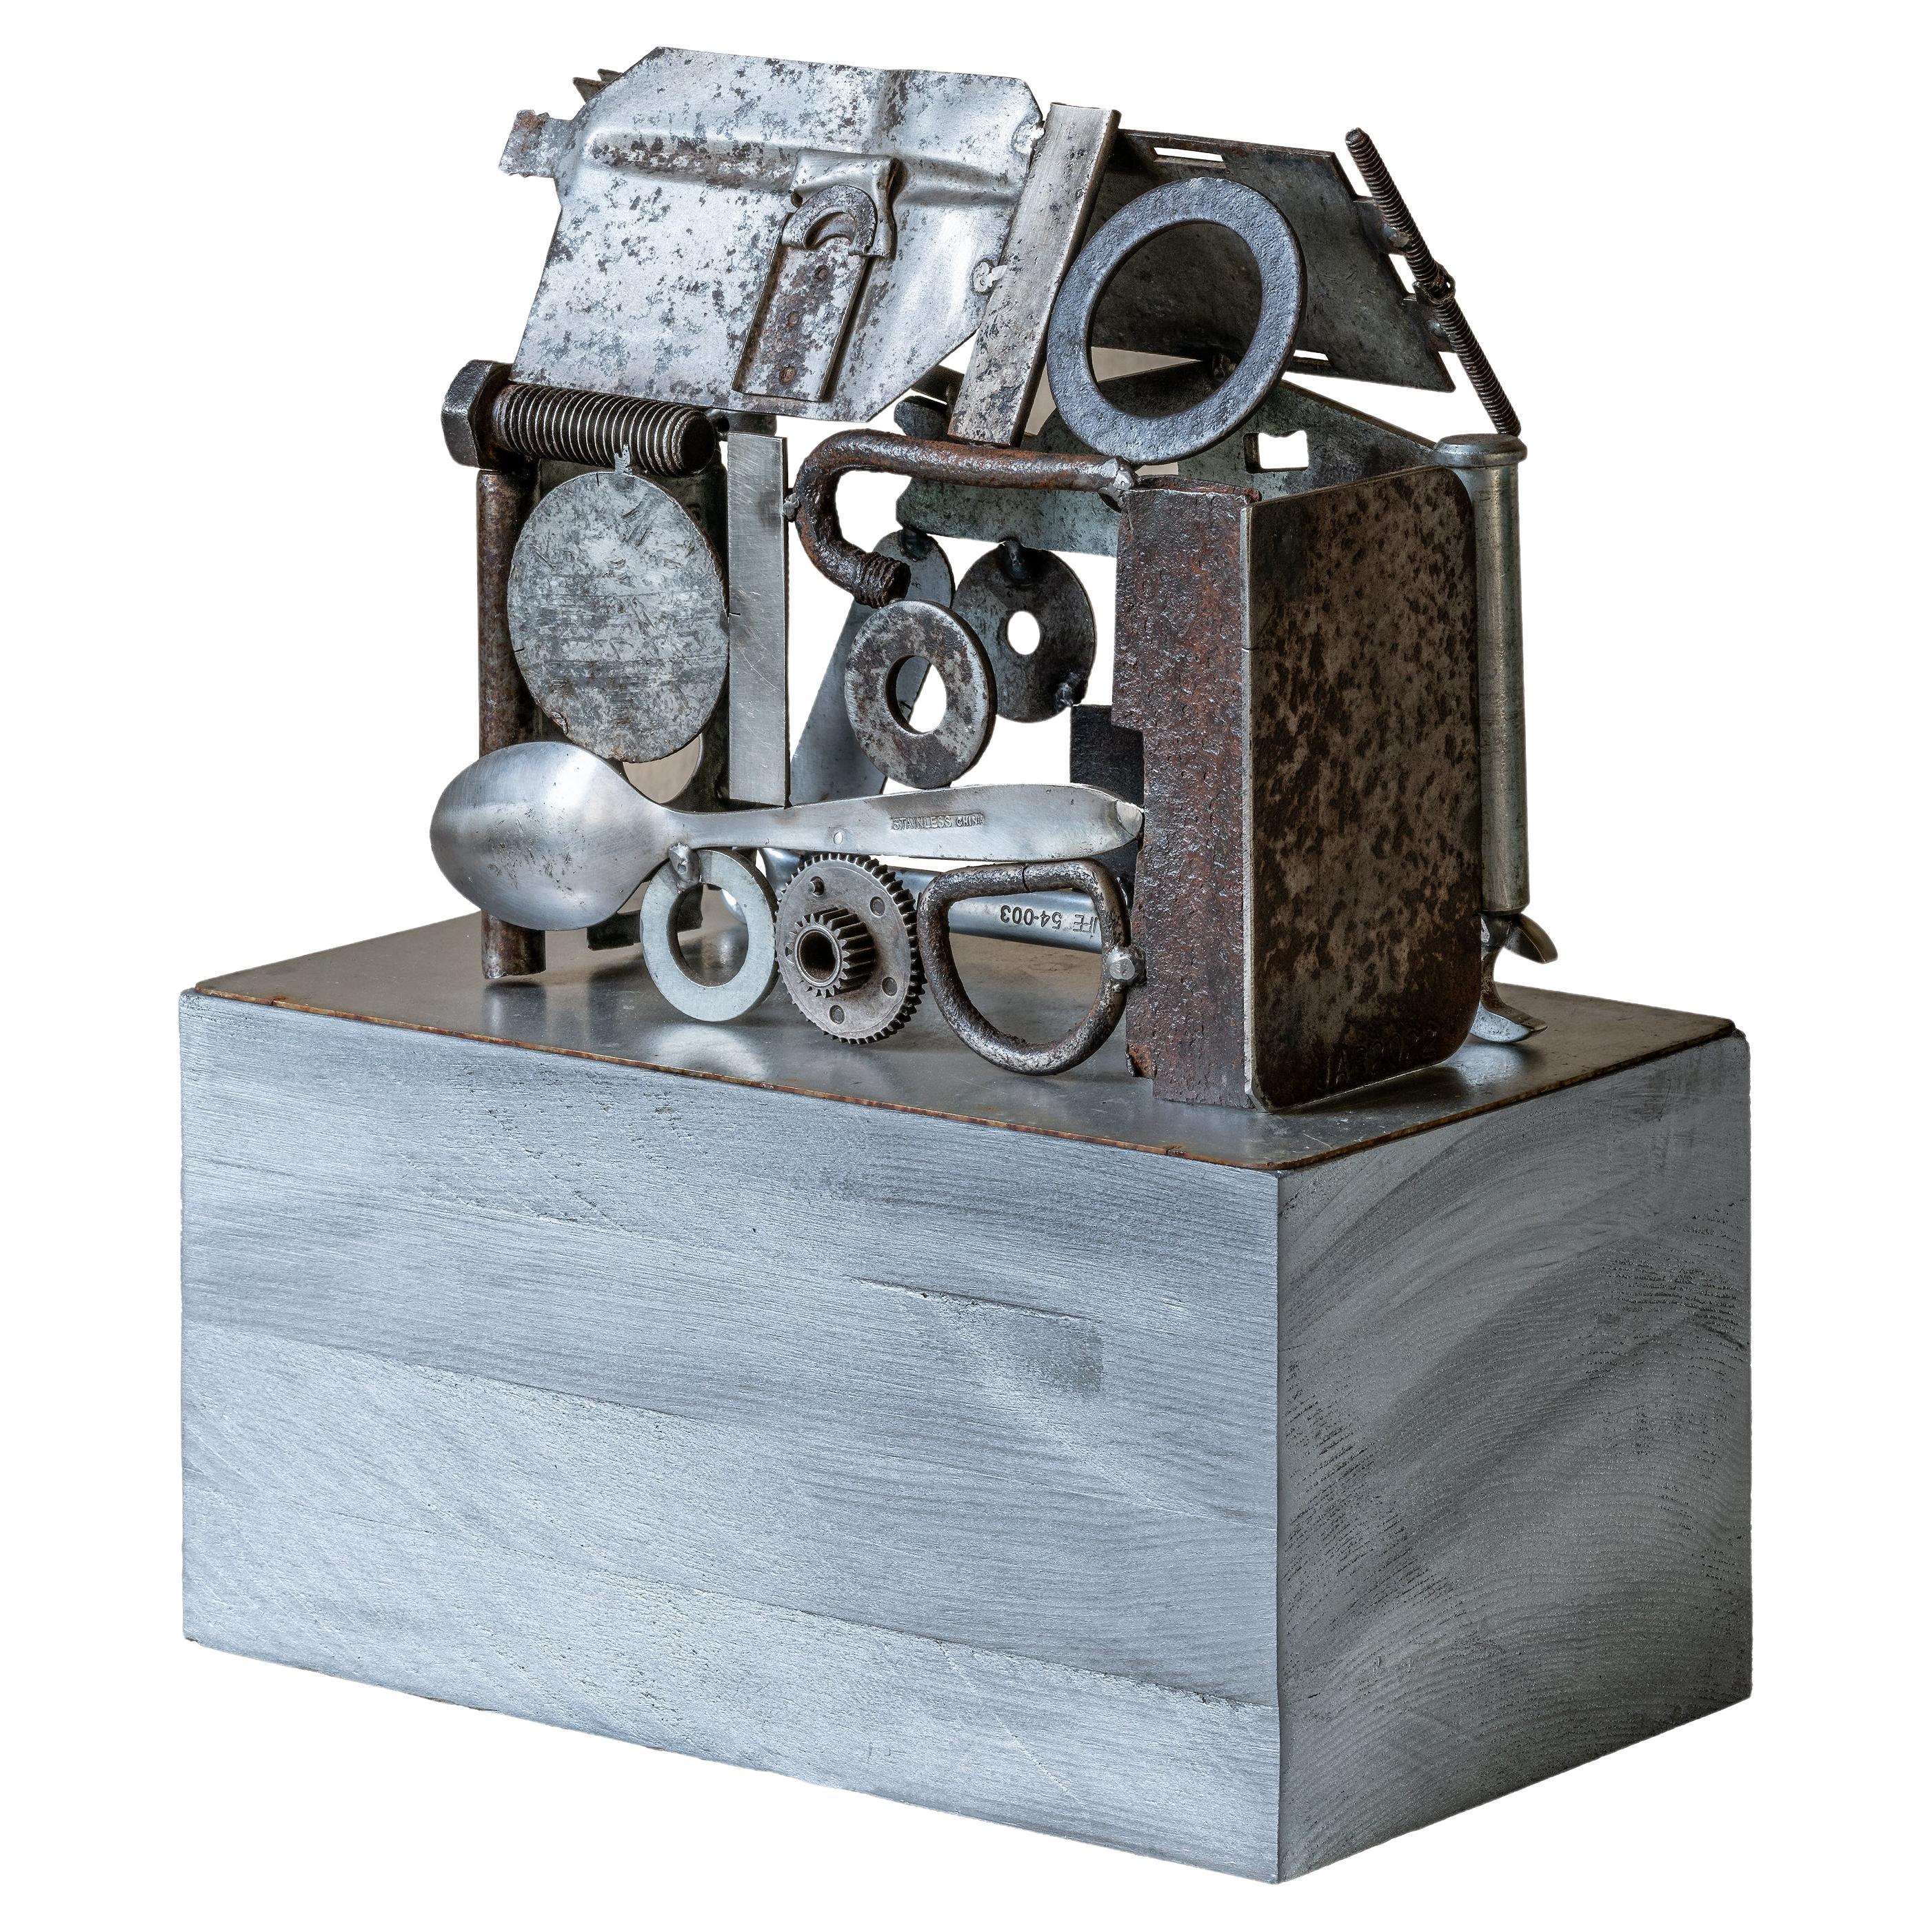 Jim Rose - Construct No. 03, Salvaged Steel and Aluminum Industrial Objects For Sale